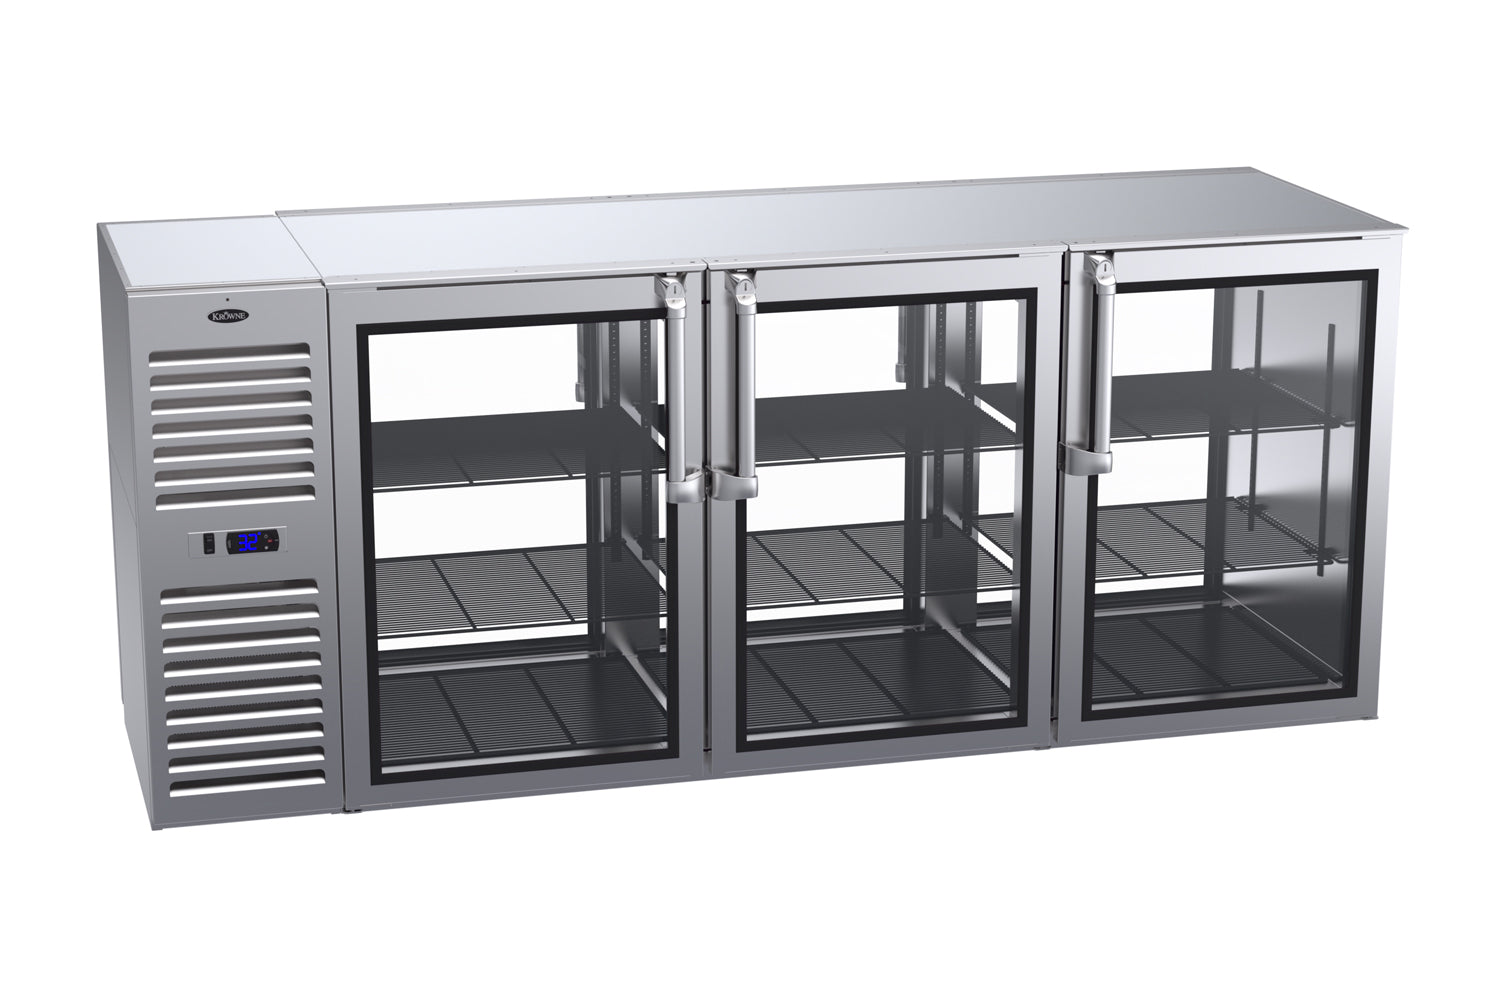 Krowne | 84" Wide 6 Glass Door Self Contained Stainless Steel Pass-Thru Back Bar